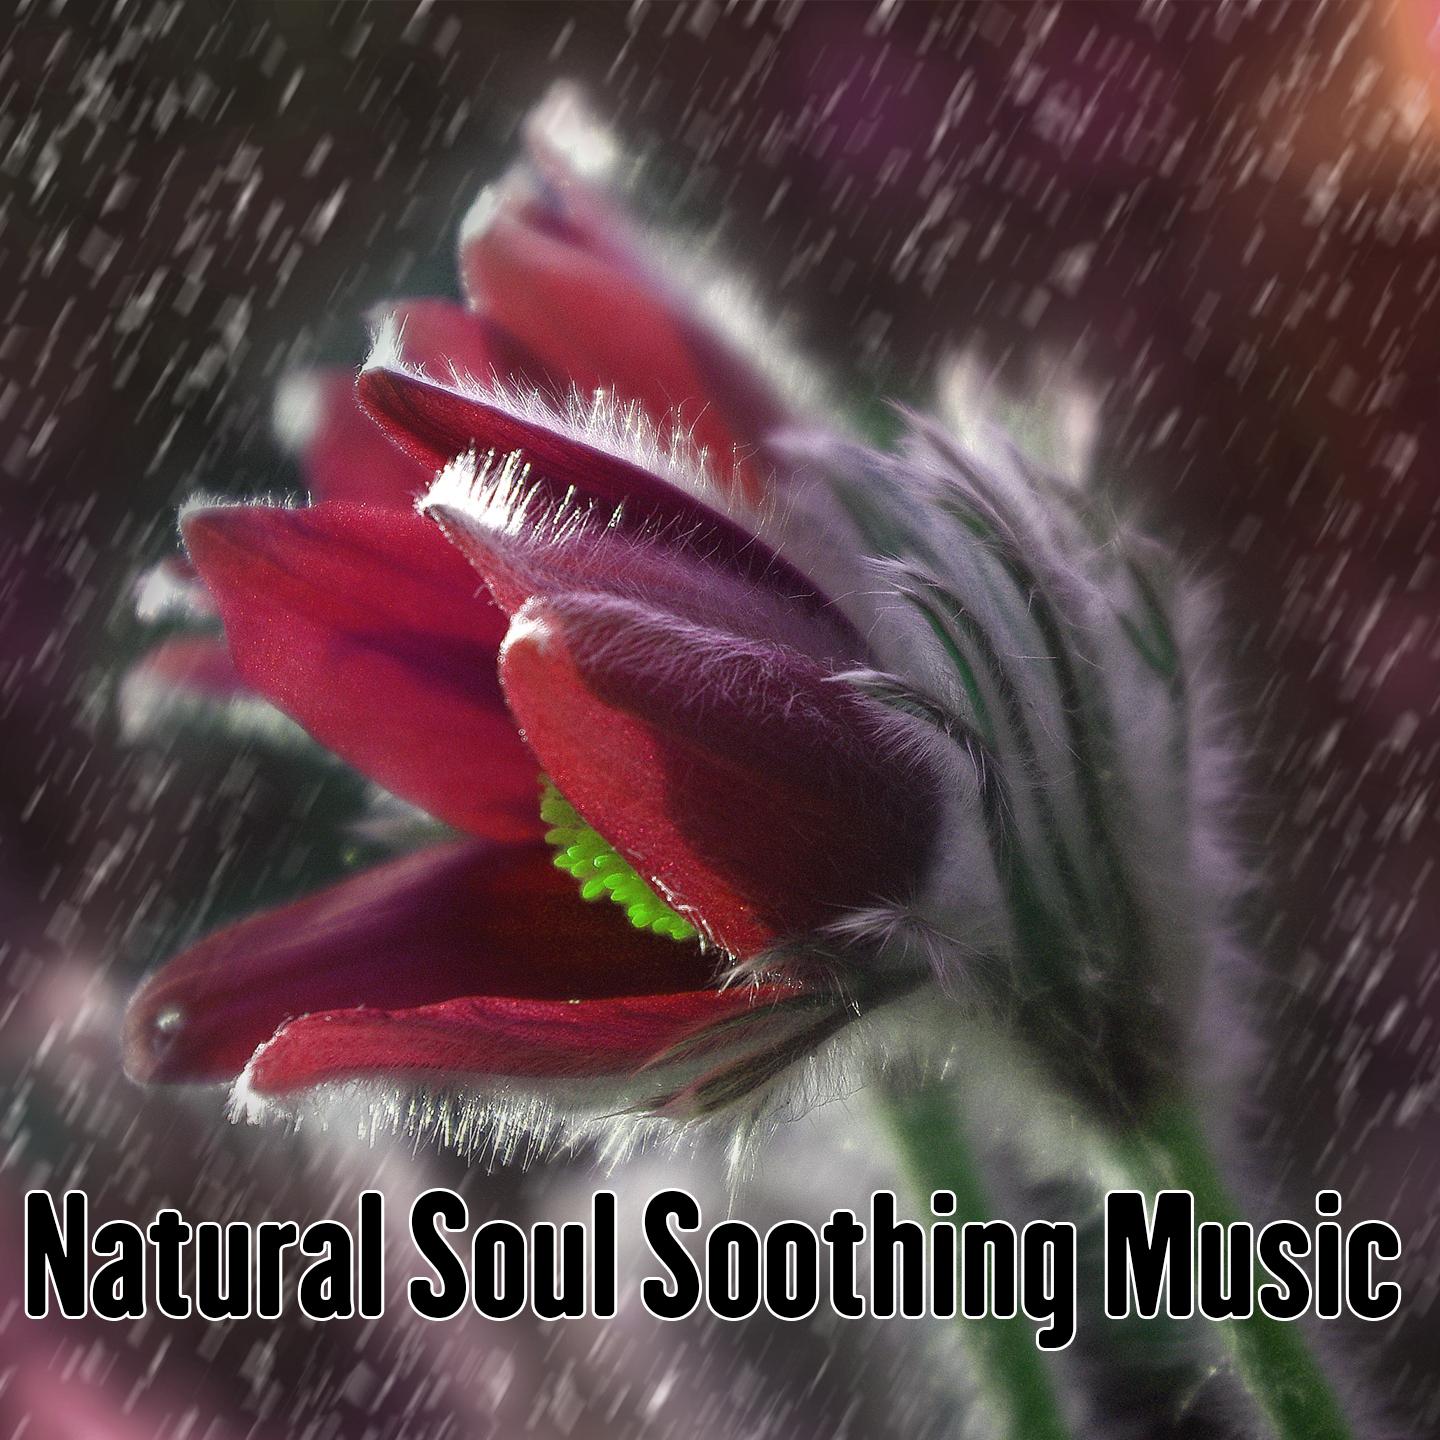 Natural Soul Soothing Music